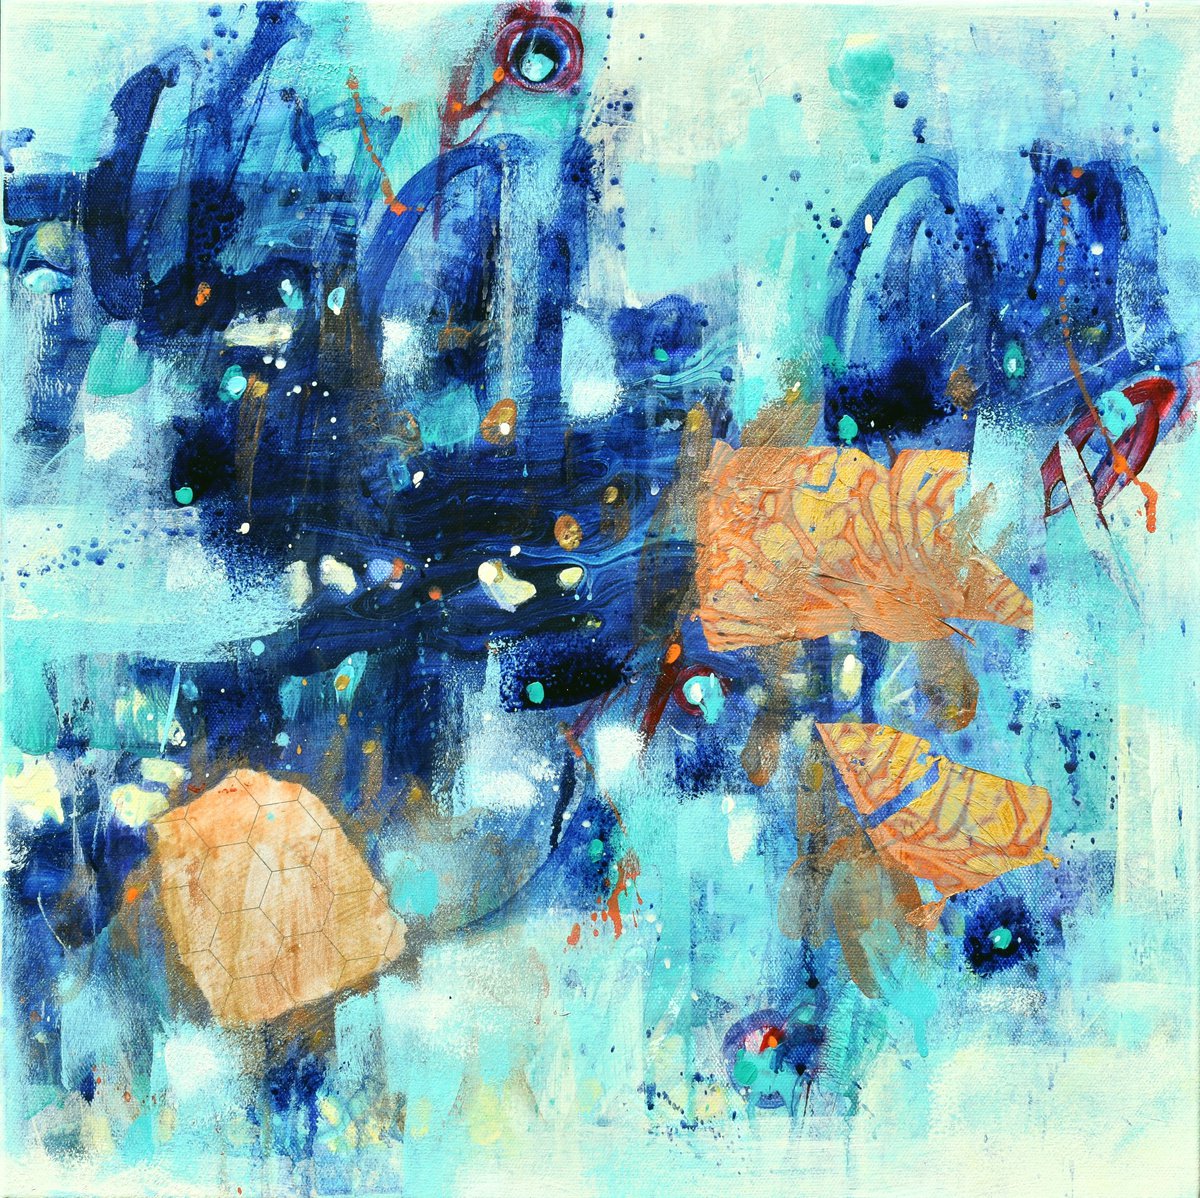 Acceptance - Abstract art - 16 x 16 IN / 41 x 41 CM - Abstract Painting, Ready to Hang by Cynthia Ligeros